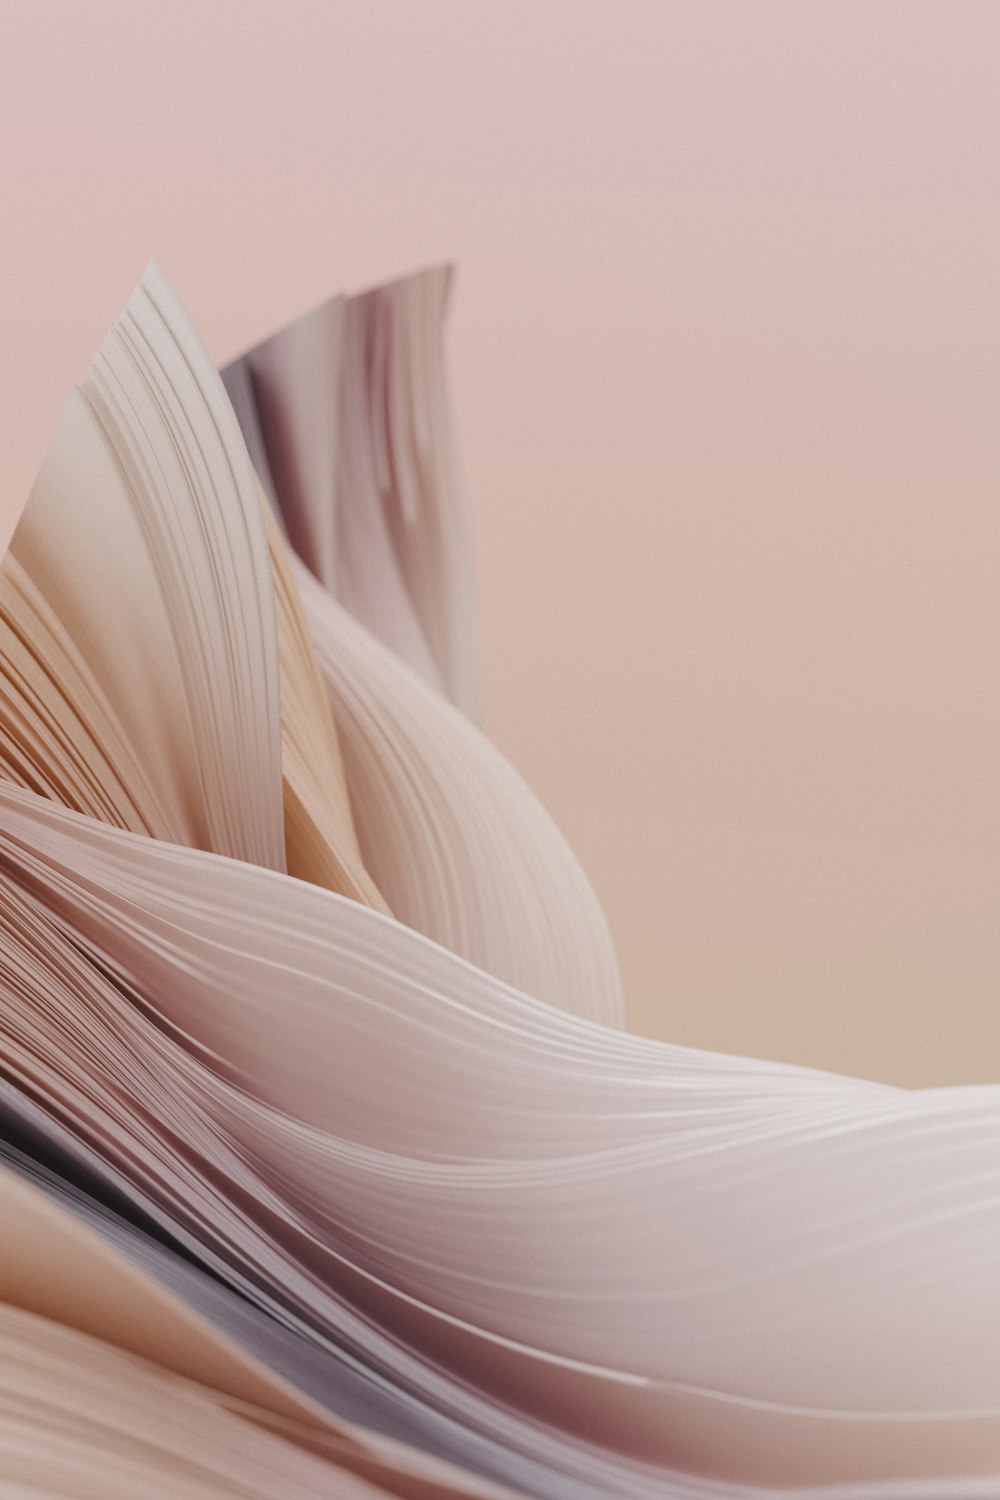 a close up of a book on a pink background